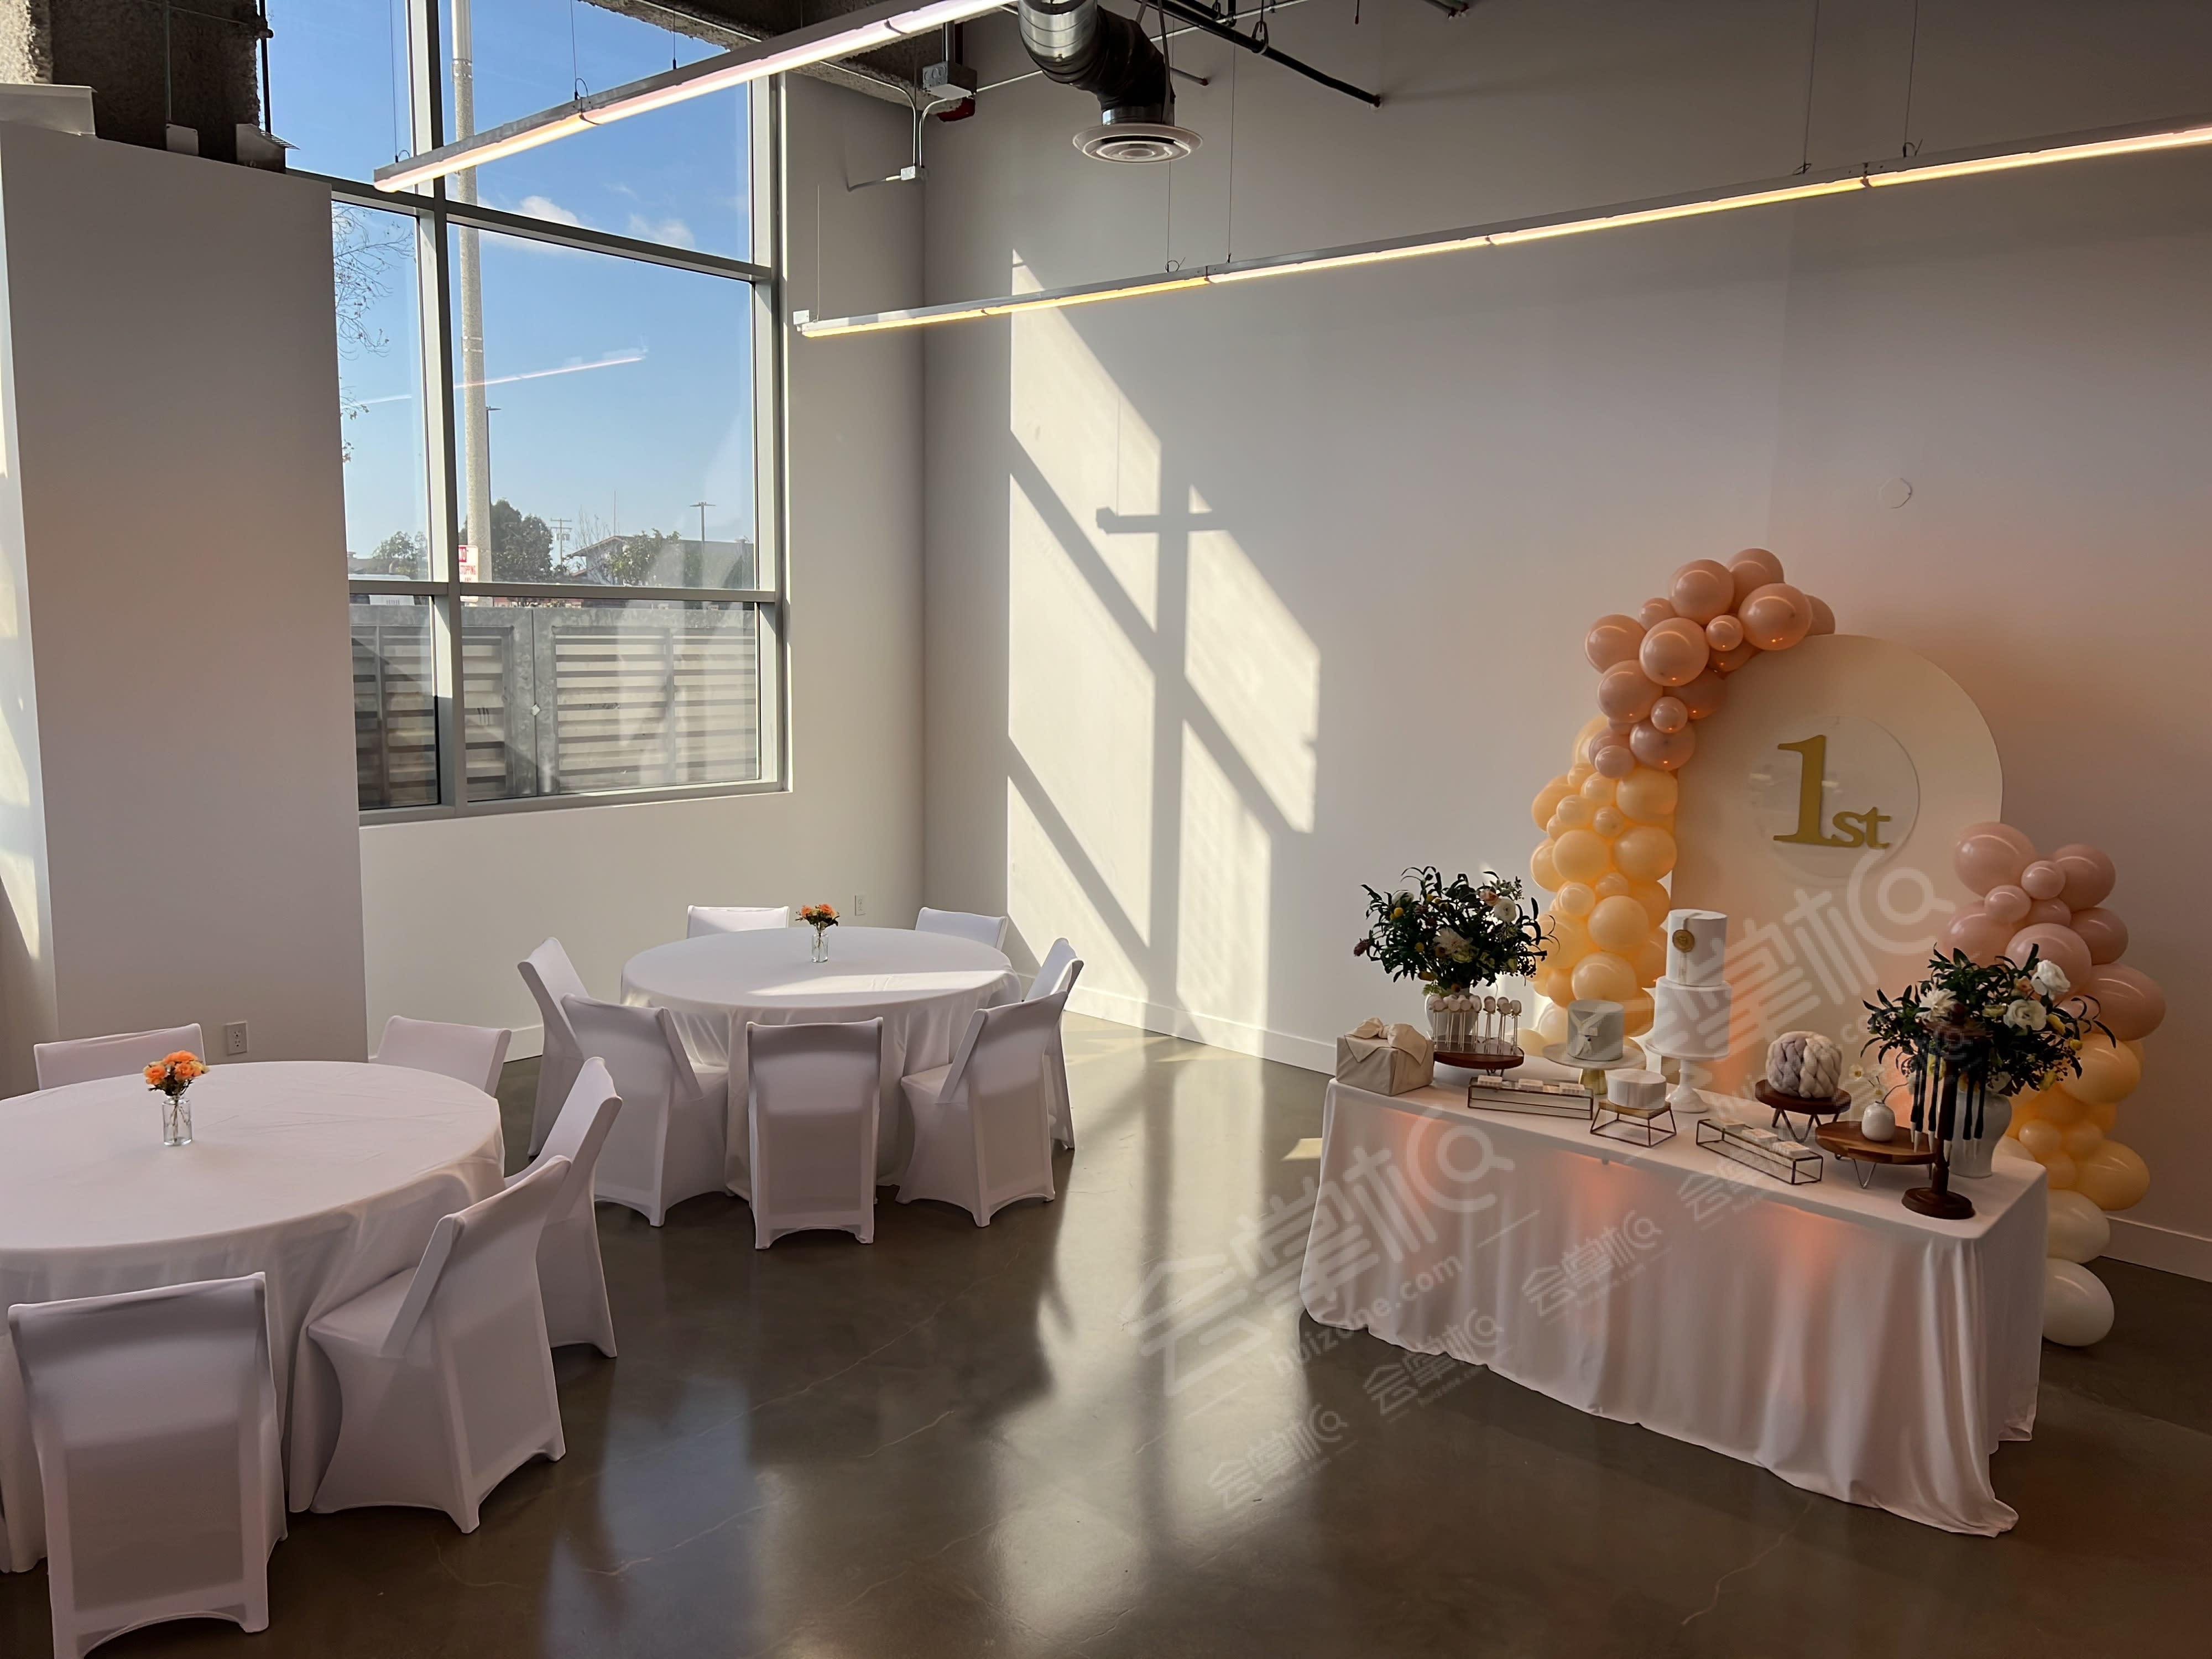 Affordable DIY Event Space